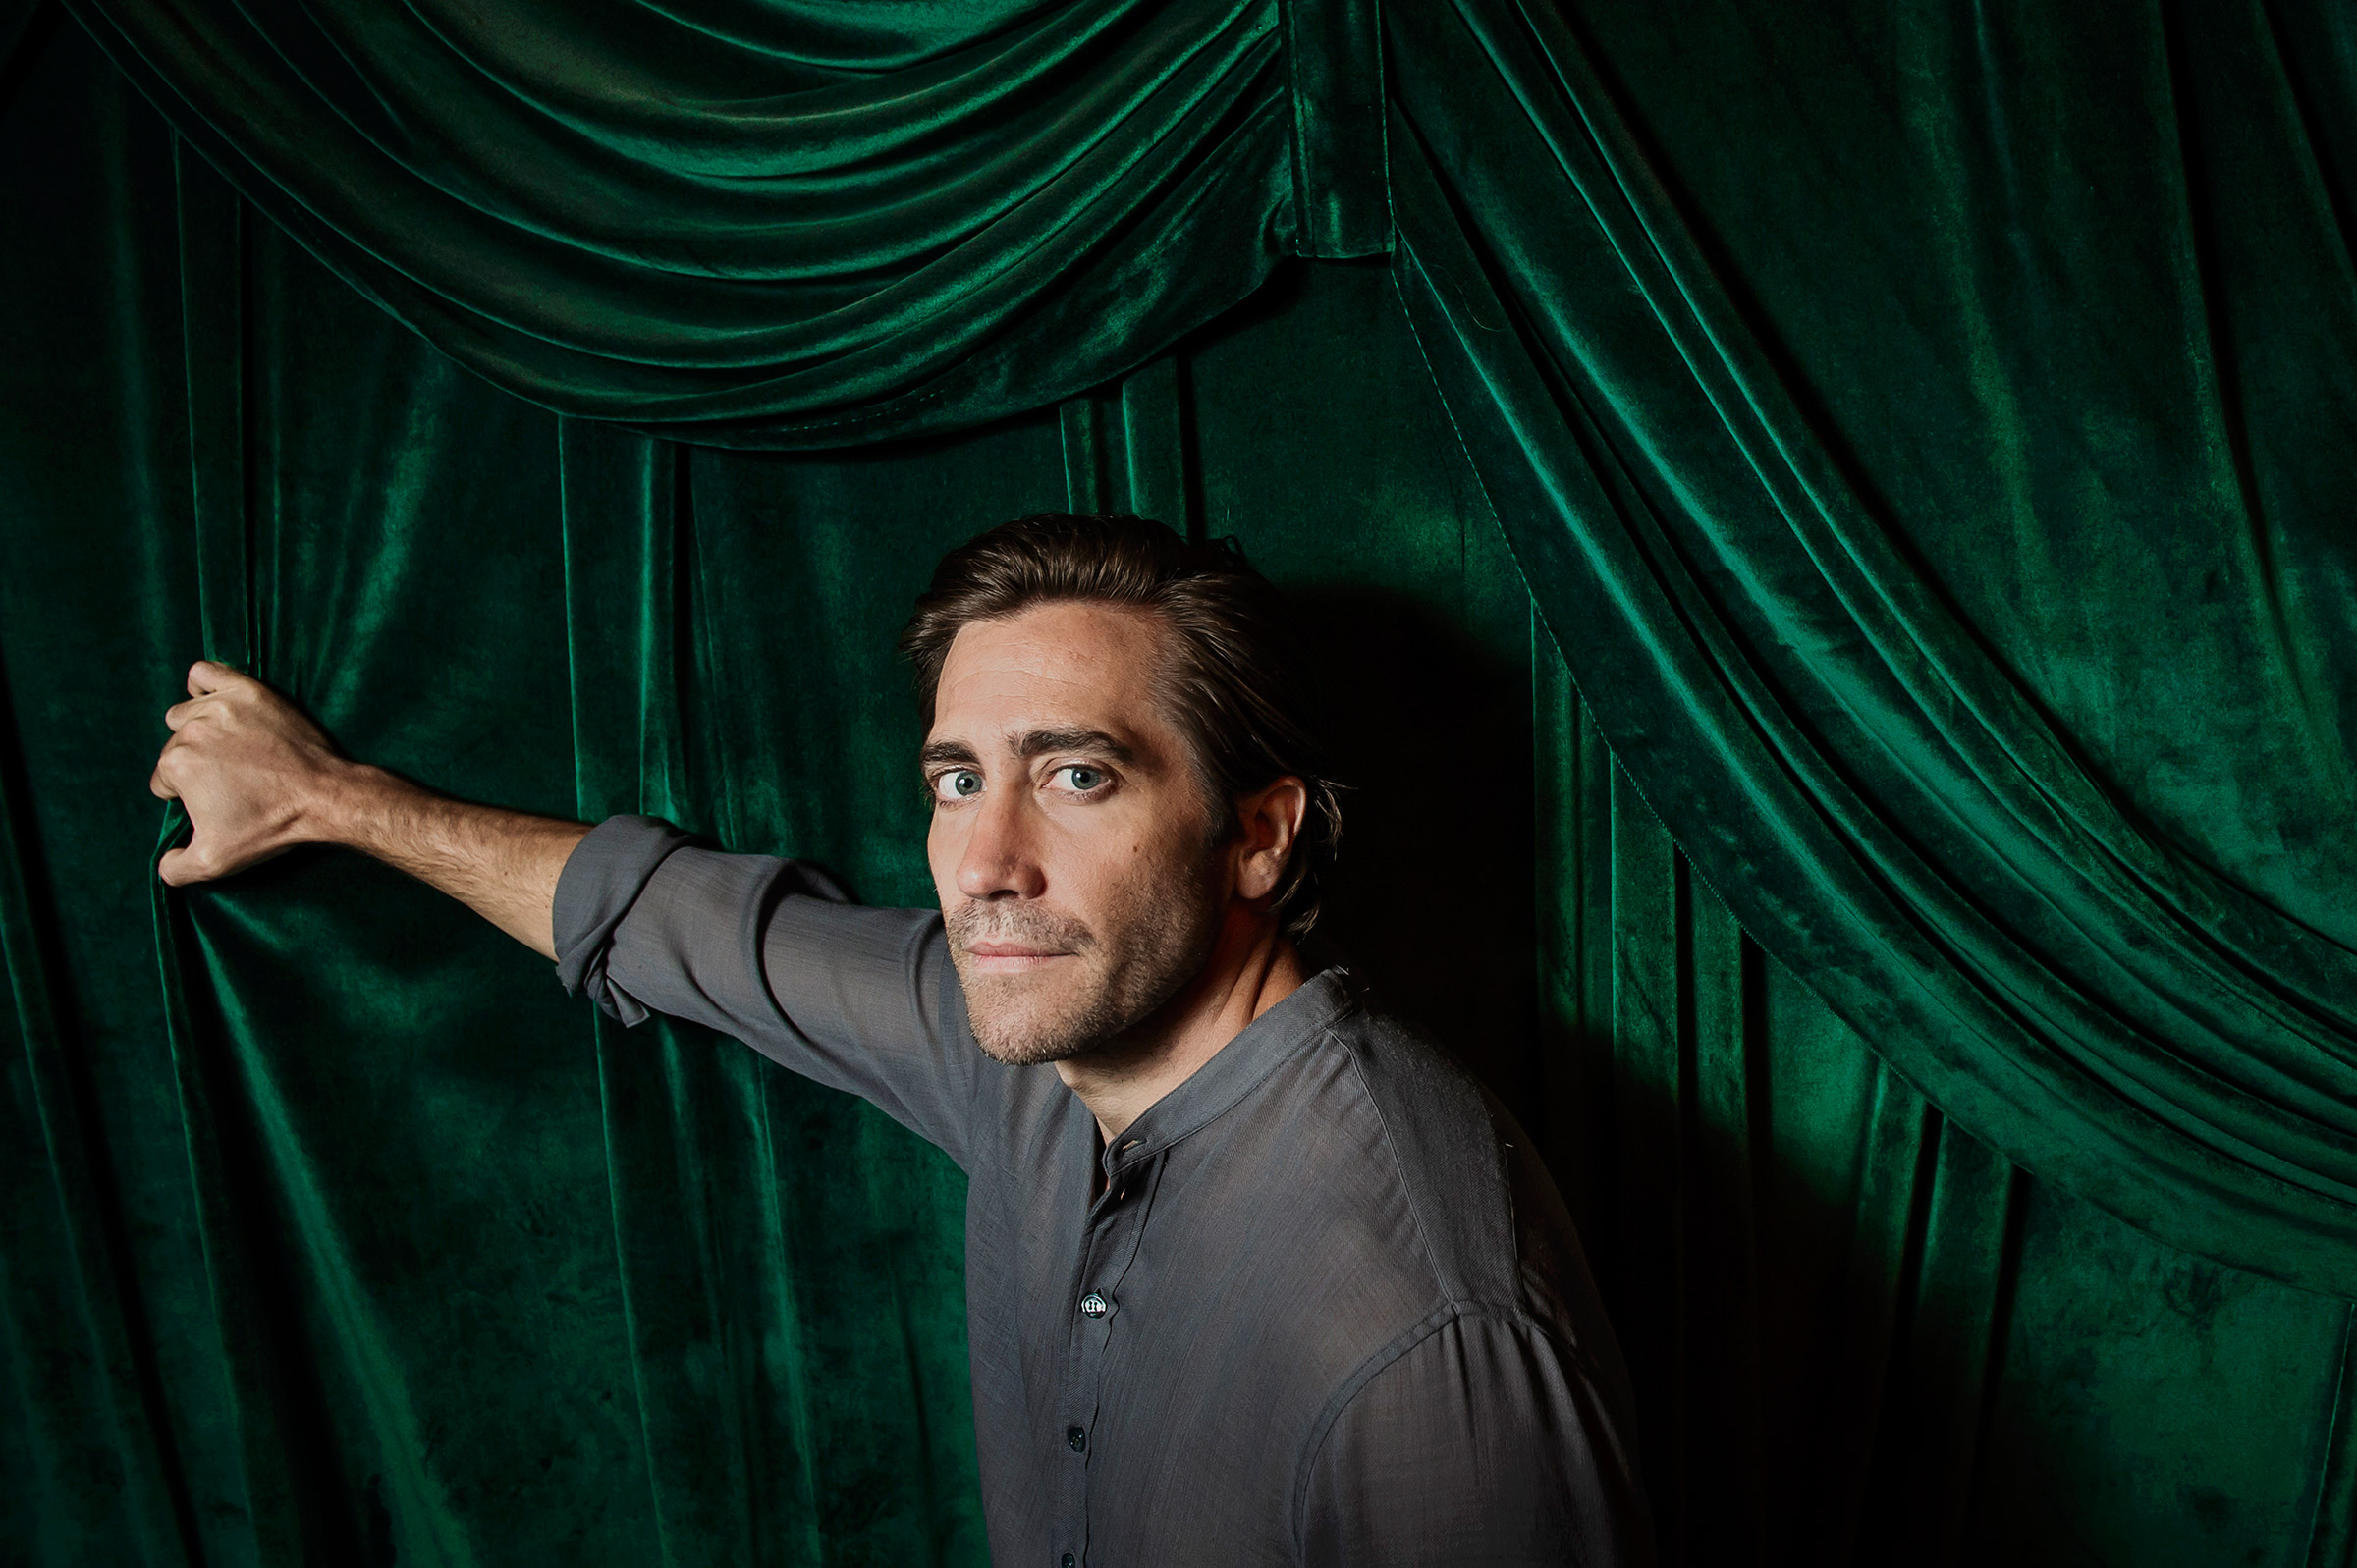 “To me, the more interesting thing is that we also need to be careful about the myths that we tell. And who we believe in,” says actor Jake Gyllenhaal. (Dina Litovsky—Redux for TIME)